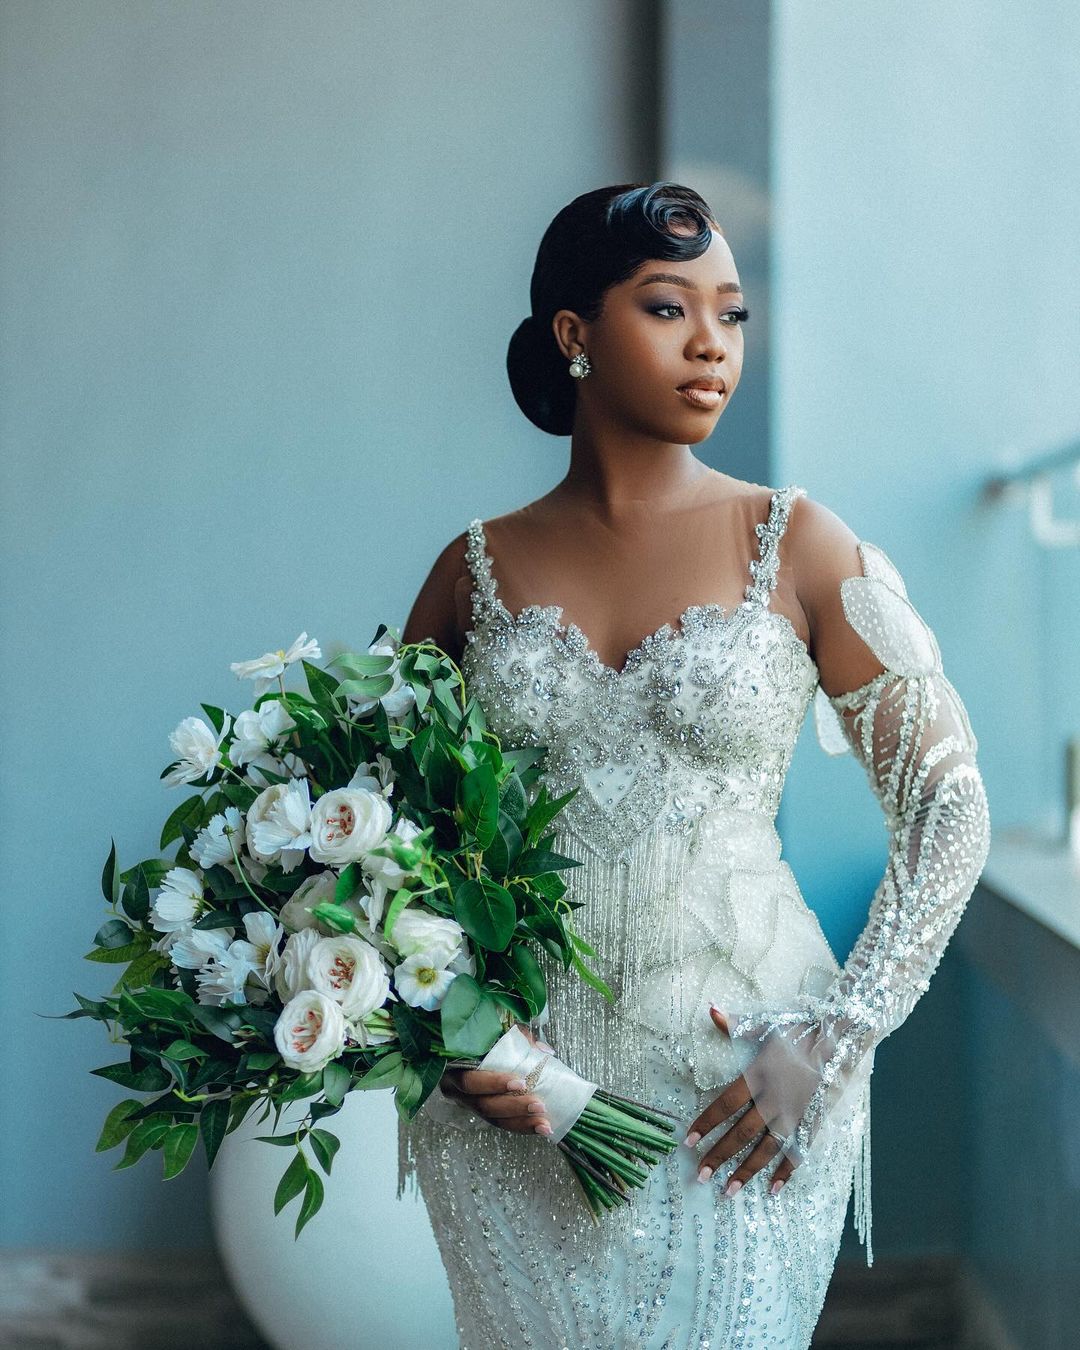 Exude a Elegant Bridal Glow on Your Massive Day With This Beautiful Inspo